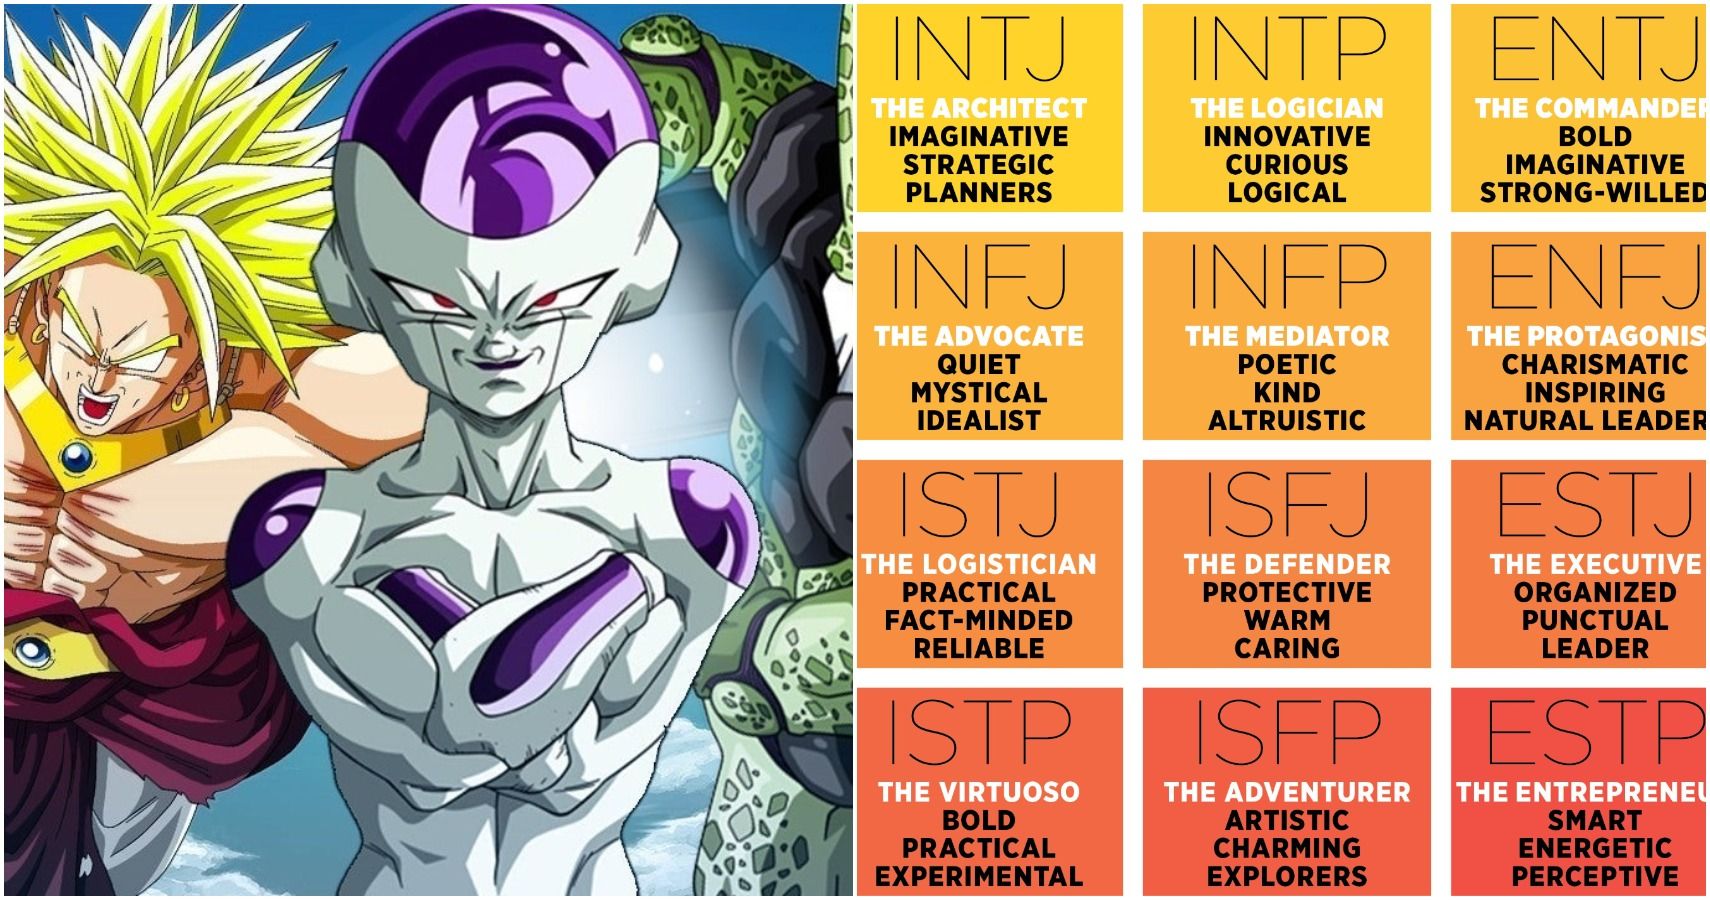 INTJ Fan Casting for MBTI Personality Types for Fictional Characters